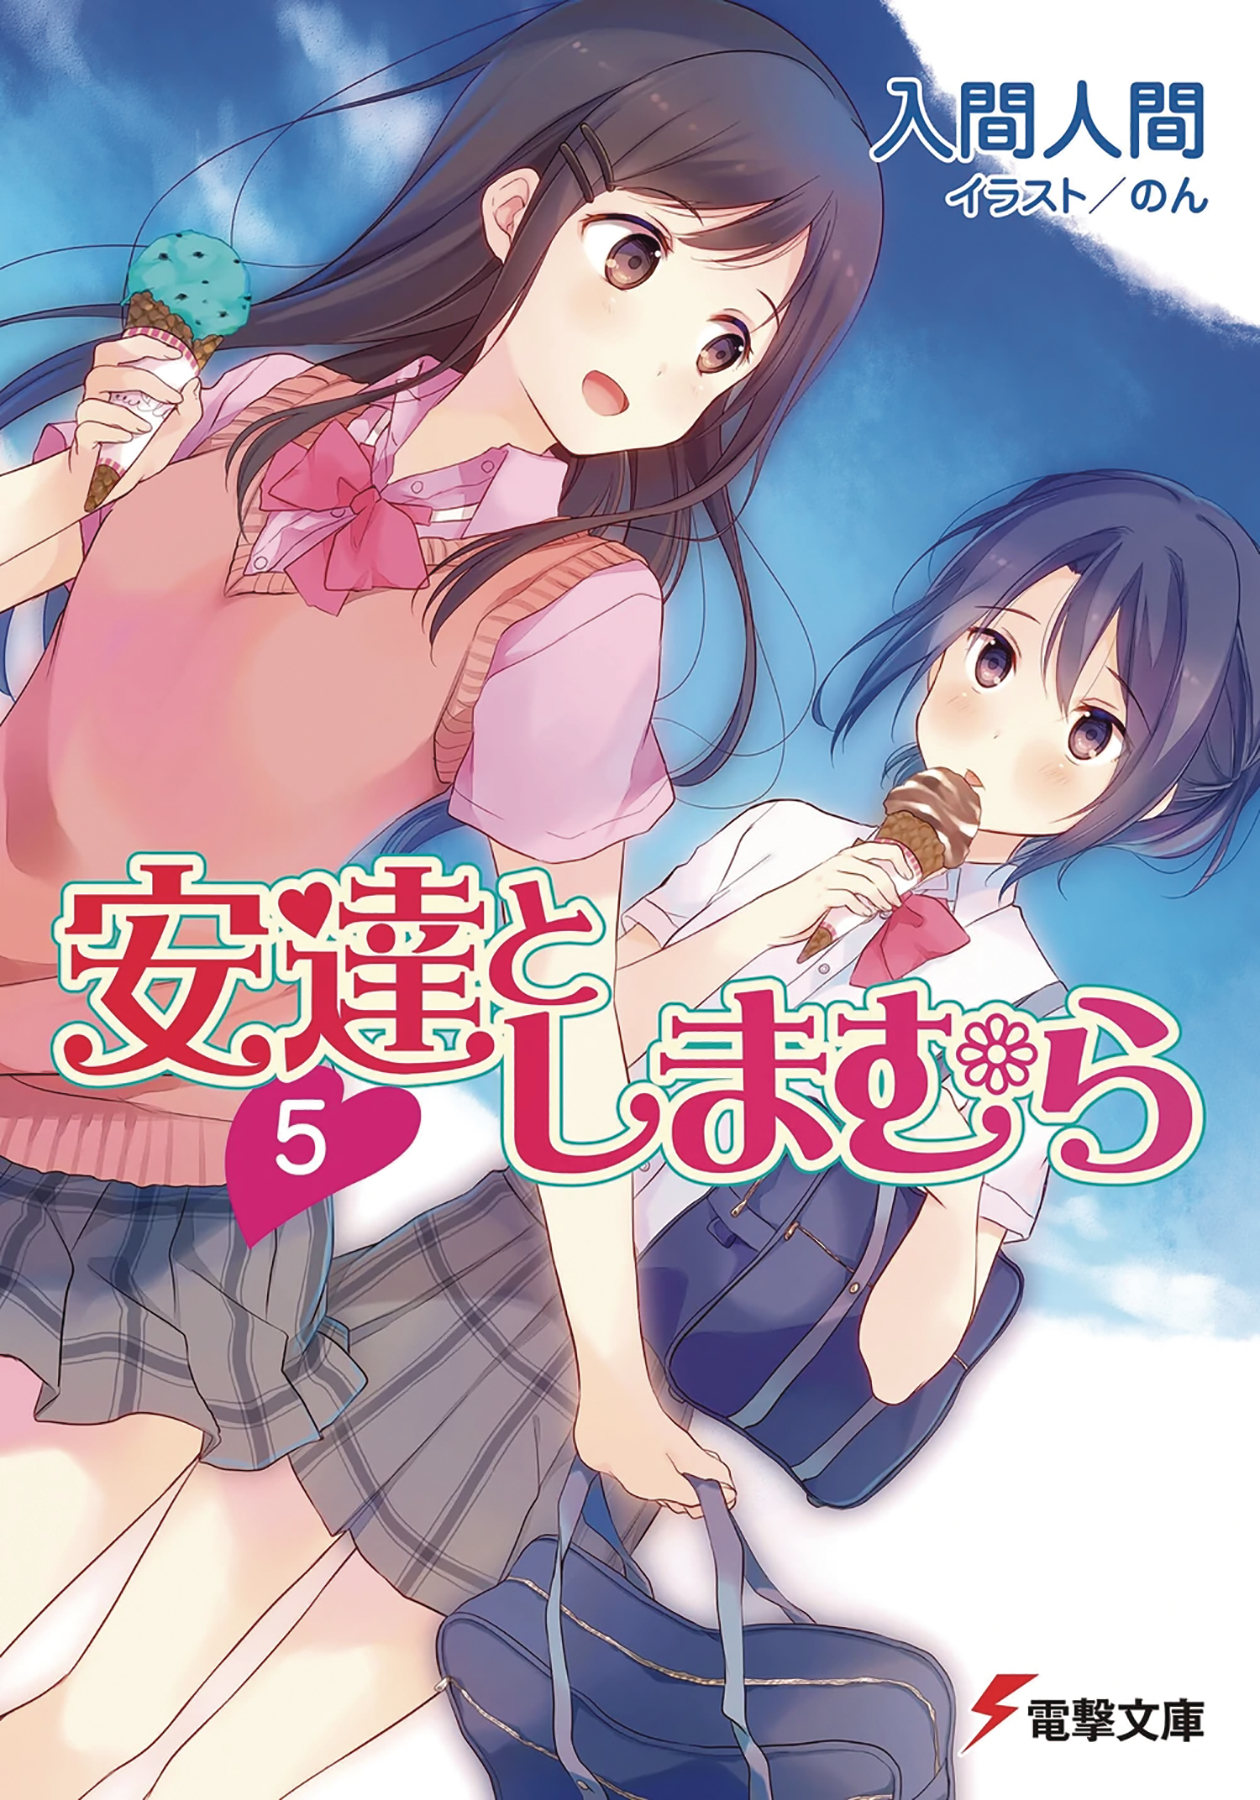 Adachi and Shimamura: How to Get Started With the Yuri Series